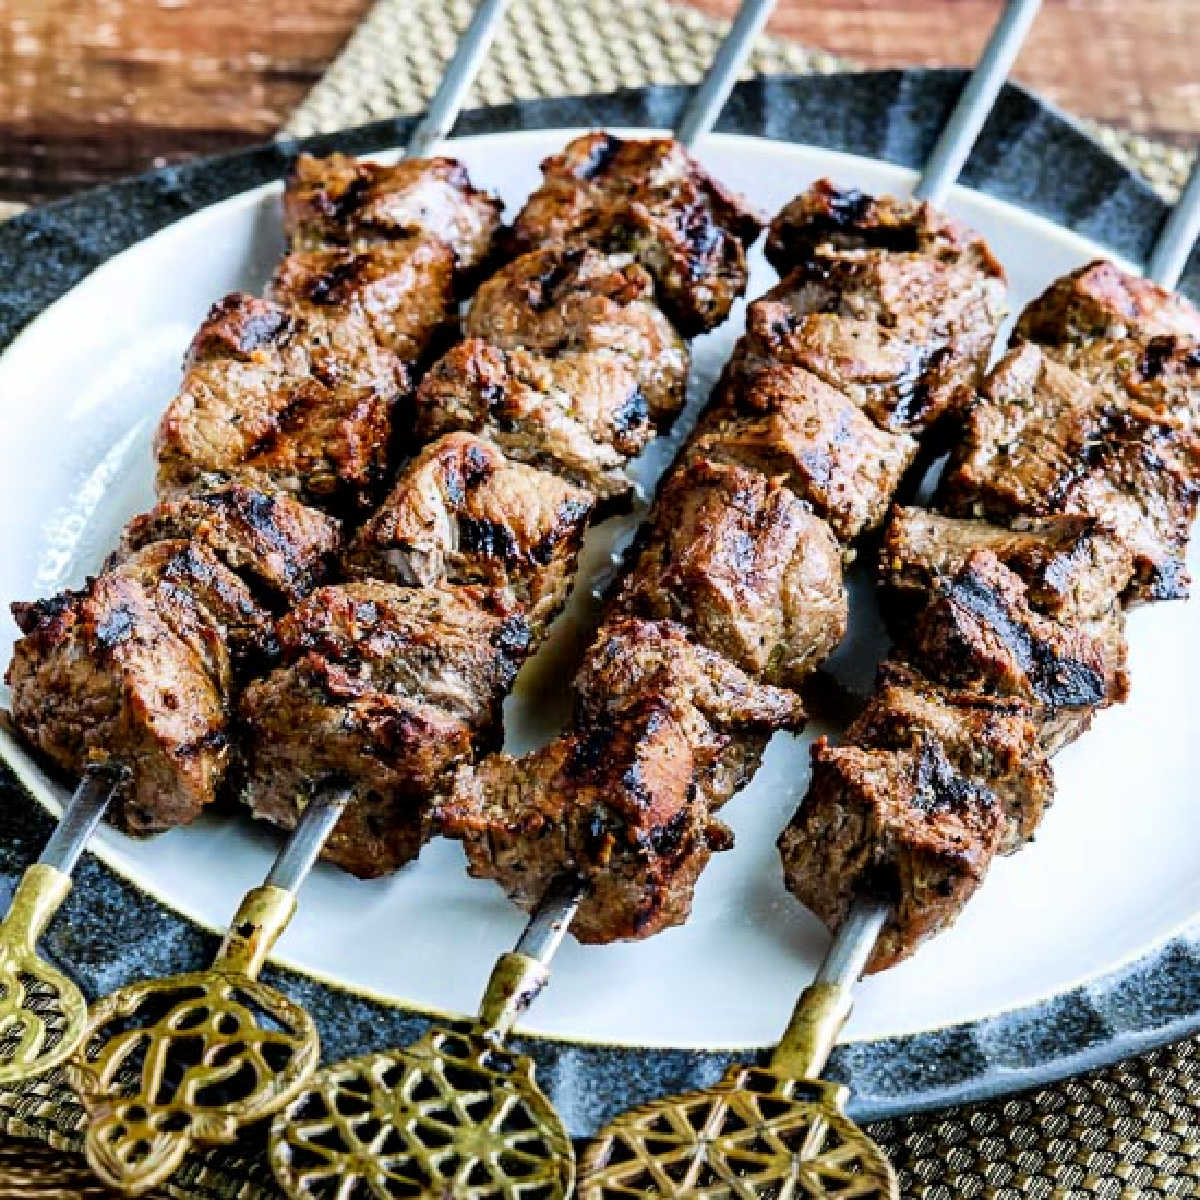 Marinated Beef Kabobs shown on serving plate with decorative skewers.